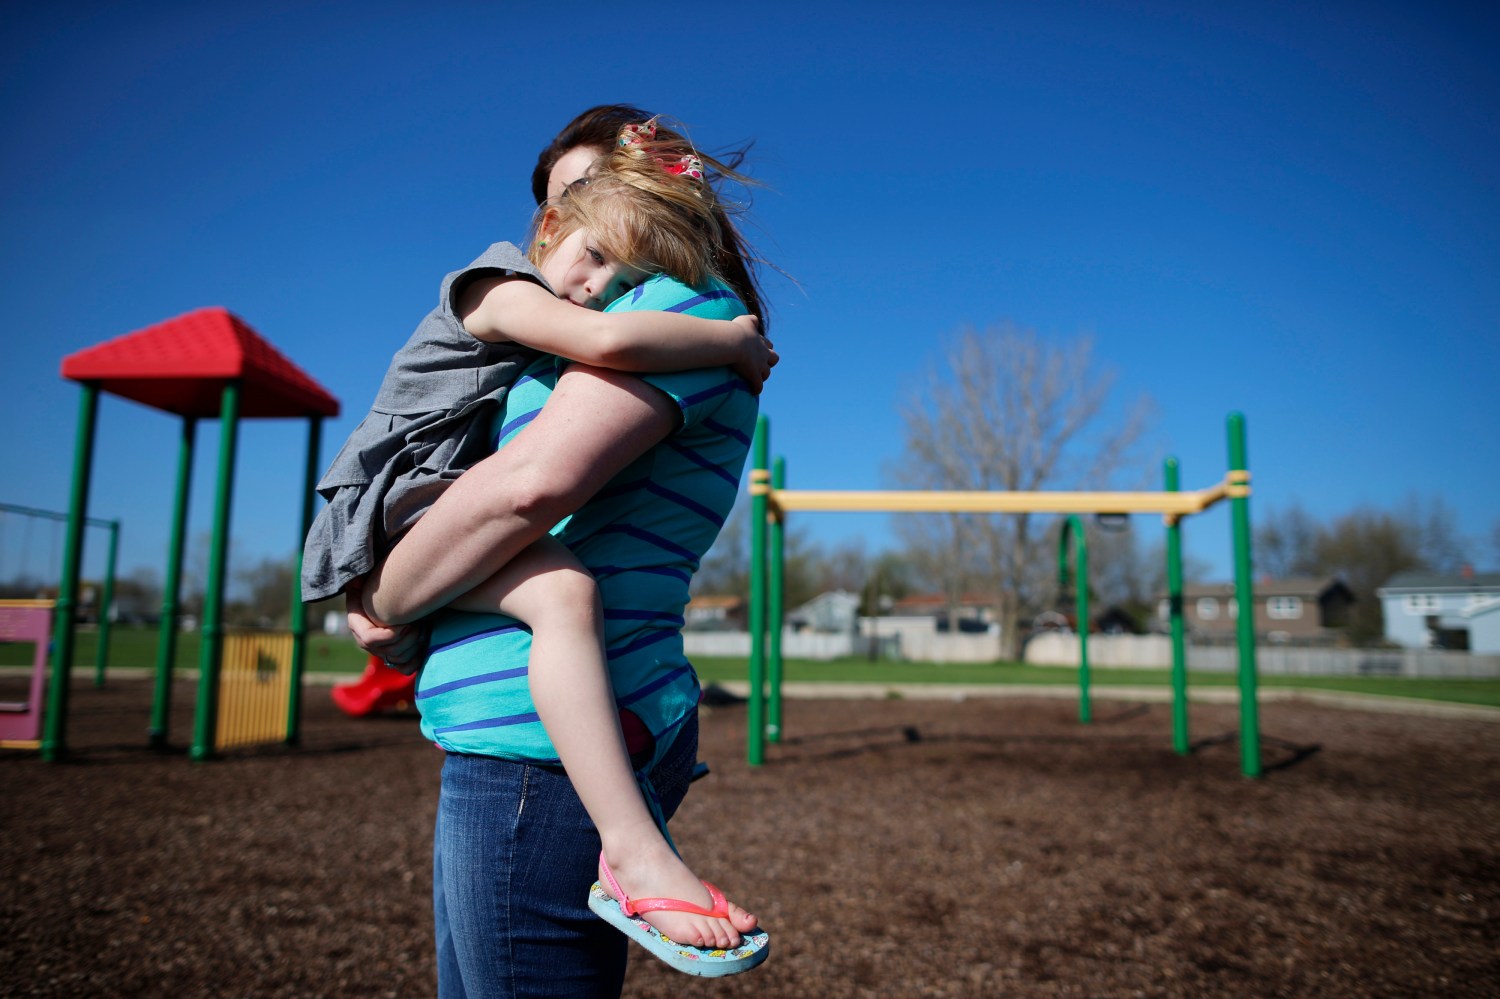 Andrea Smith holds her daughter Norah at a playground in Winthrop Harbor, Illinois